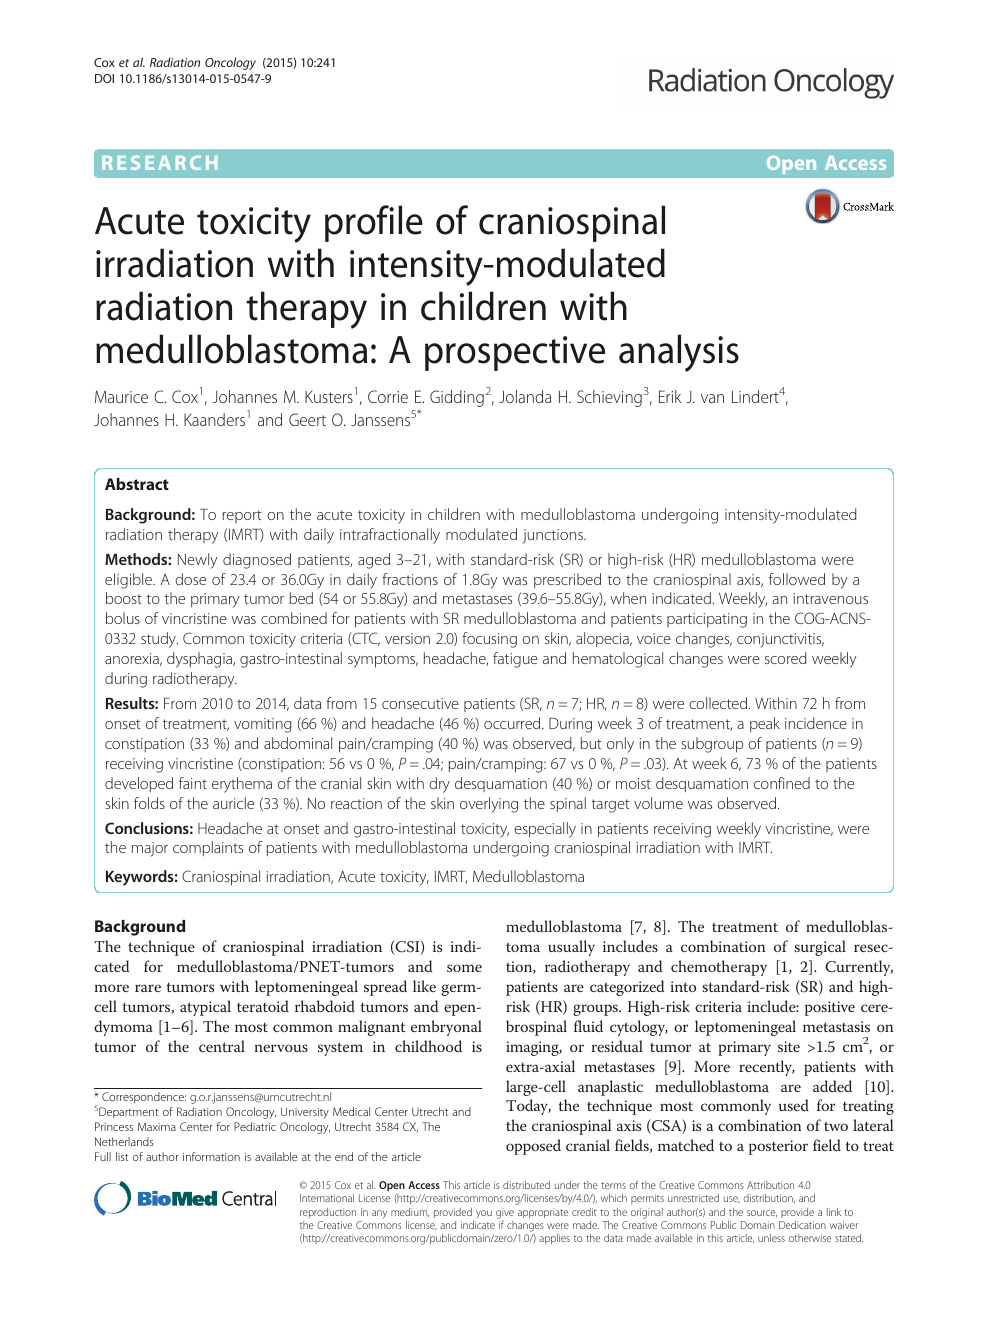 Acute Toxicity Profile Of Craniospinal Irradiation With Intensity Modulated Radiation Therapy In Children With Medulloblastoma A Prospective Analysis Topic Of Research Paper In Clinical Medicine Download Scholarly Article Pdf And Read For